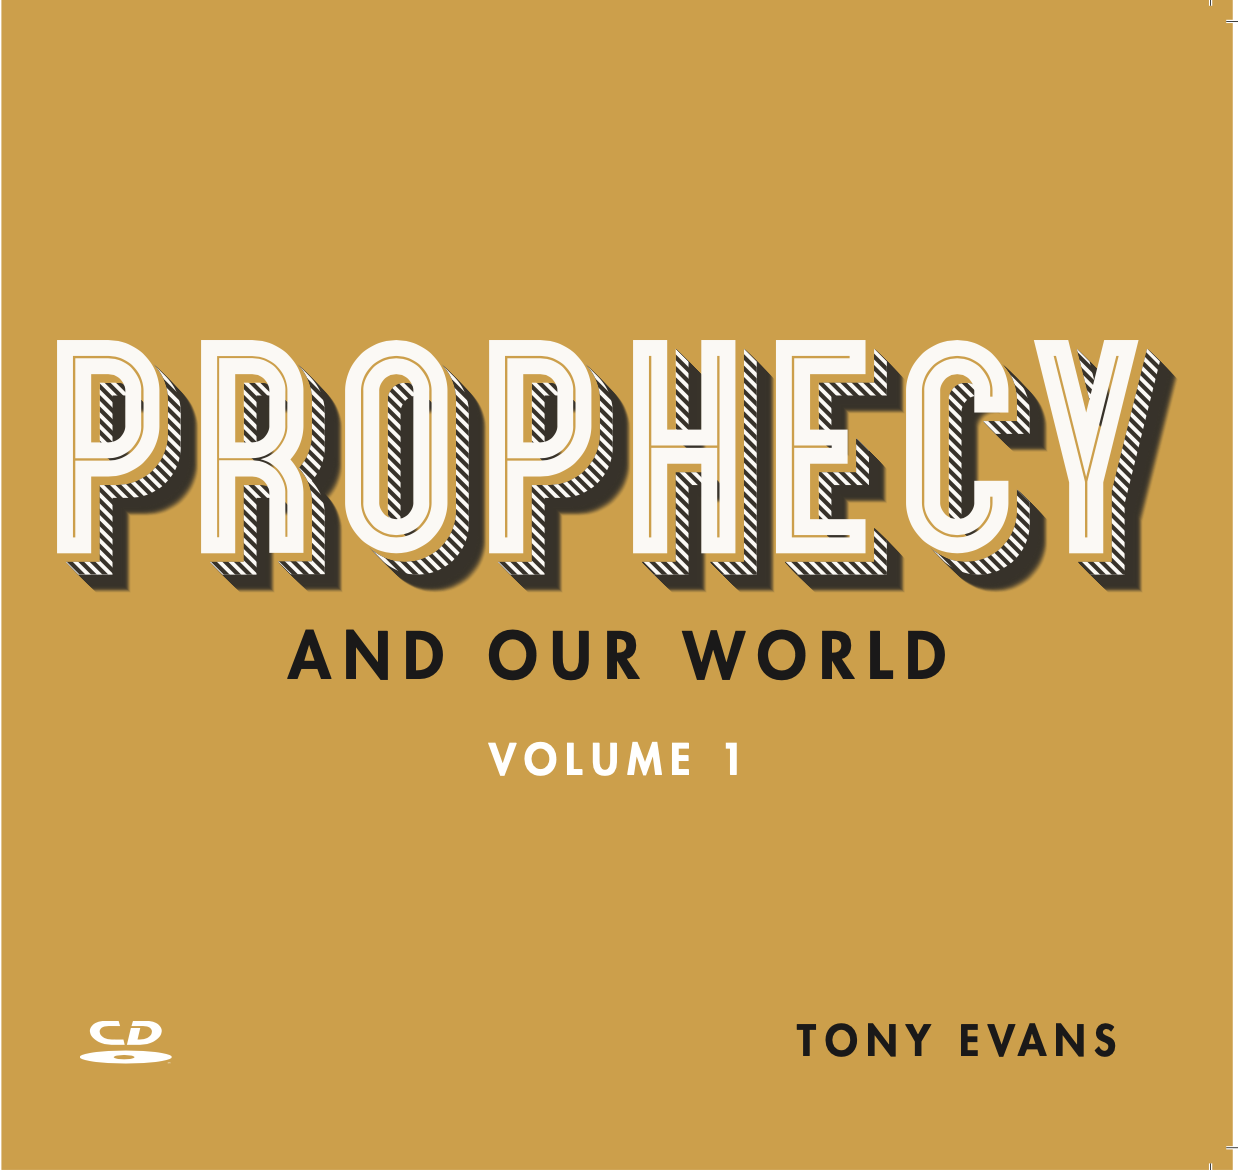 Prophecy and Our World Vol 1 - CD Series